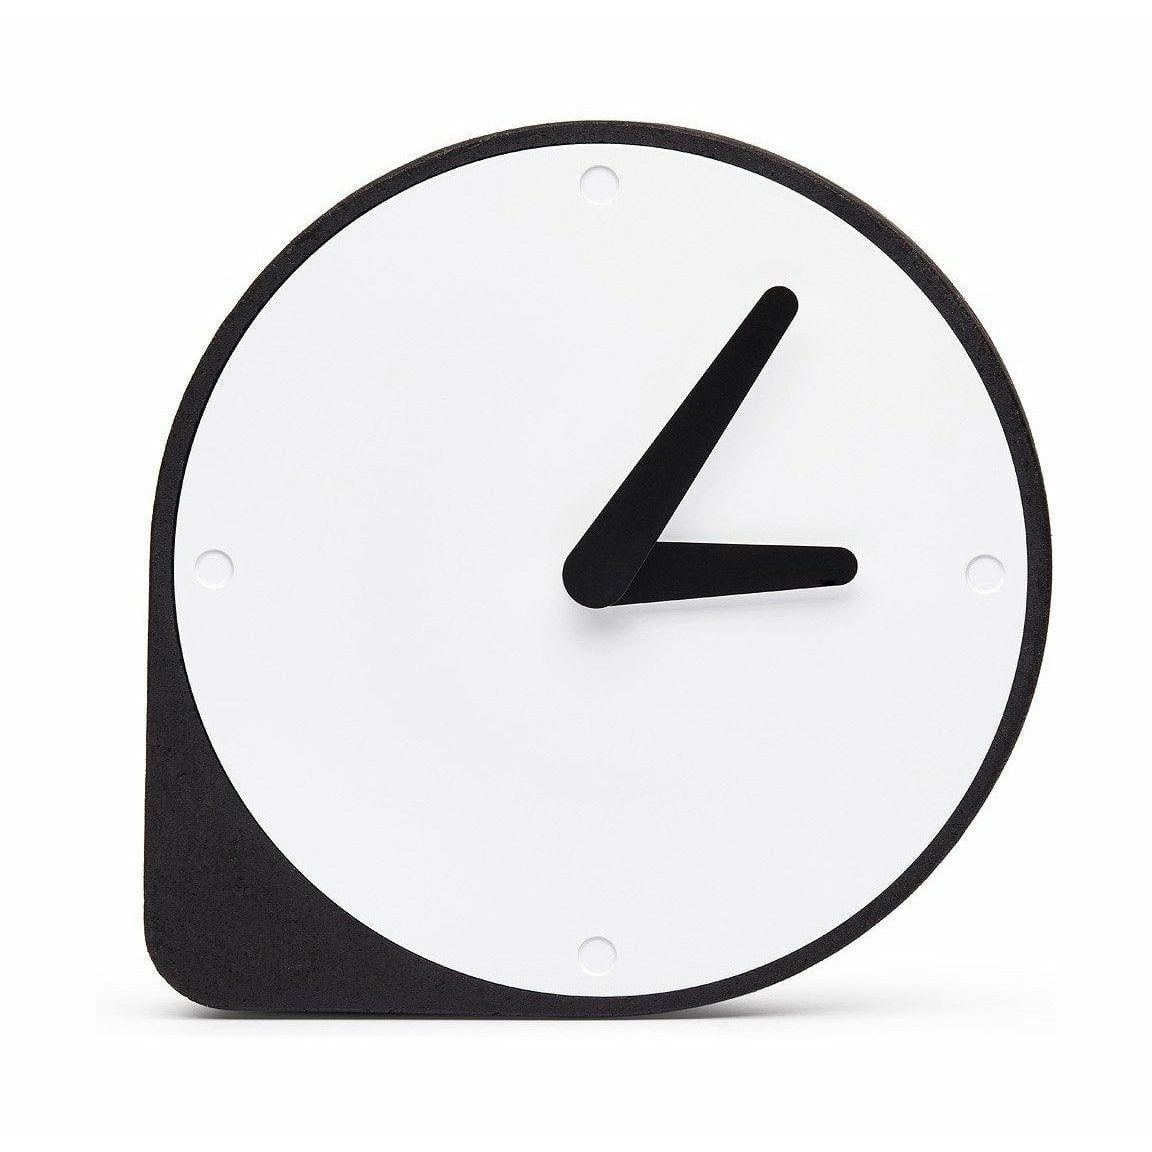 A Puik Clork table clock with an asymmetrical shape, sitting on a white surface.